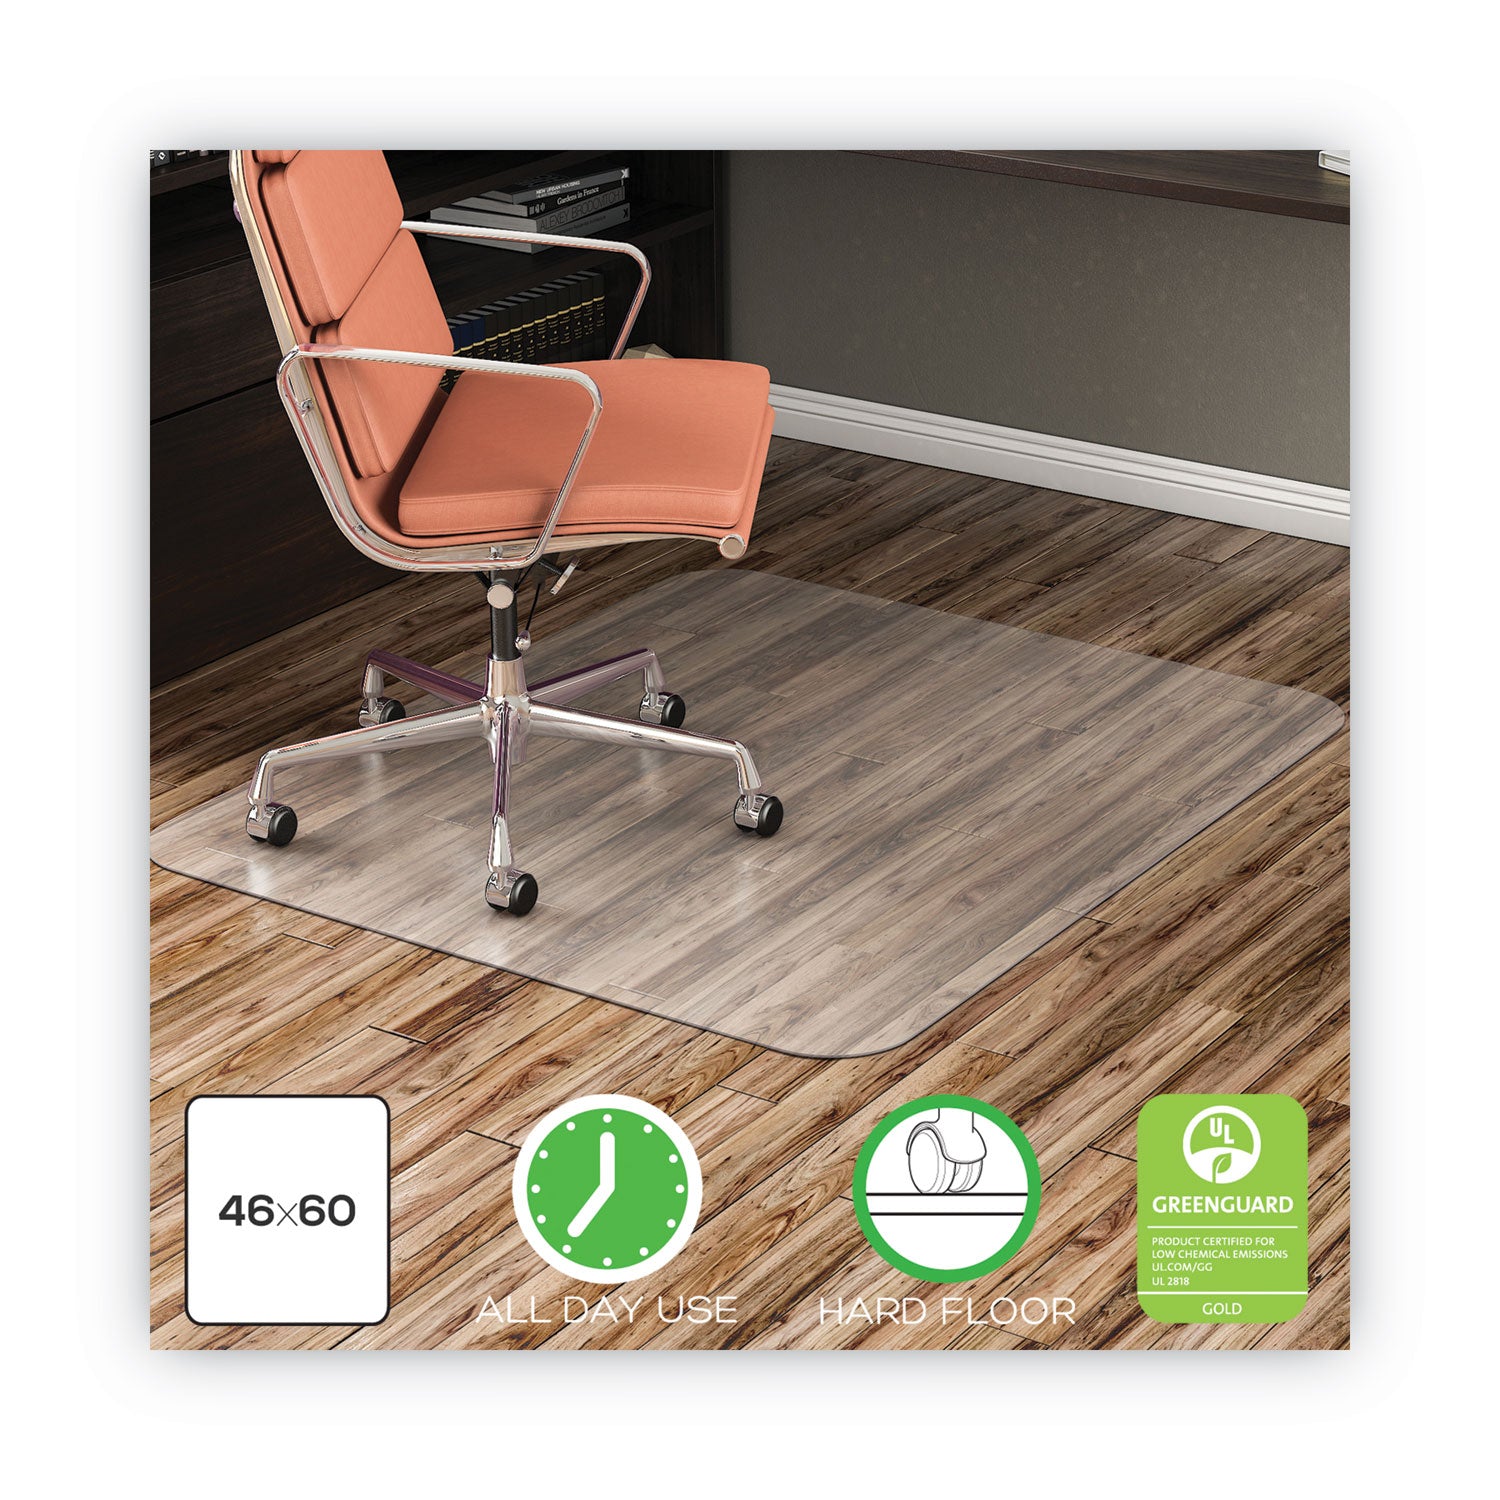 economat-all-day-use-chair-mat-for-hard-floors-rolled-packed-46-x-60-clear_defcm2e442fcom - 2